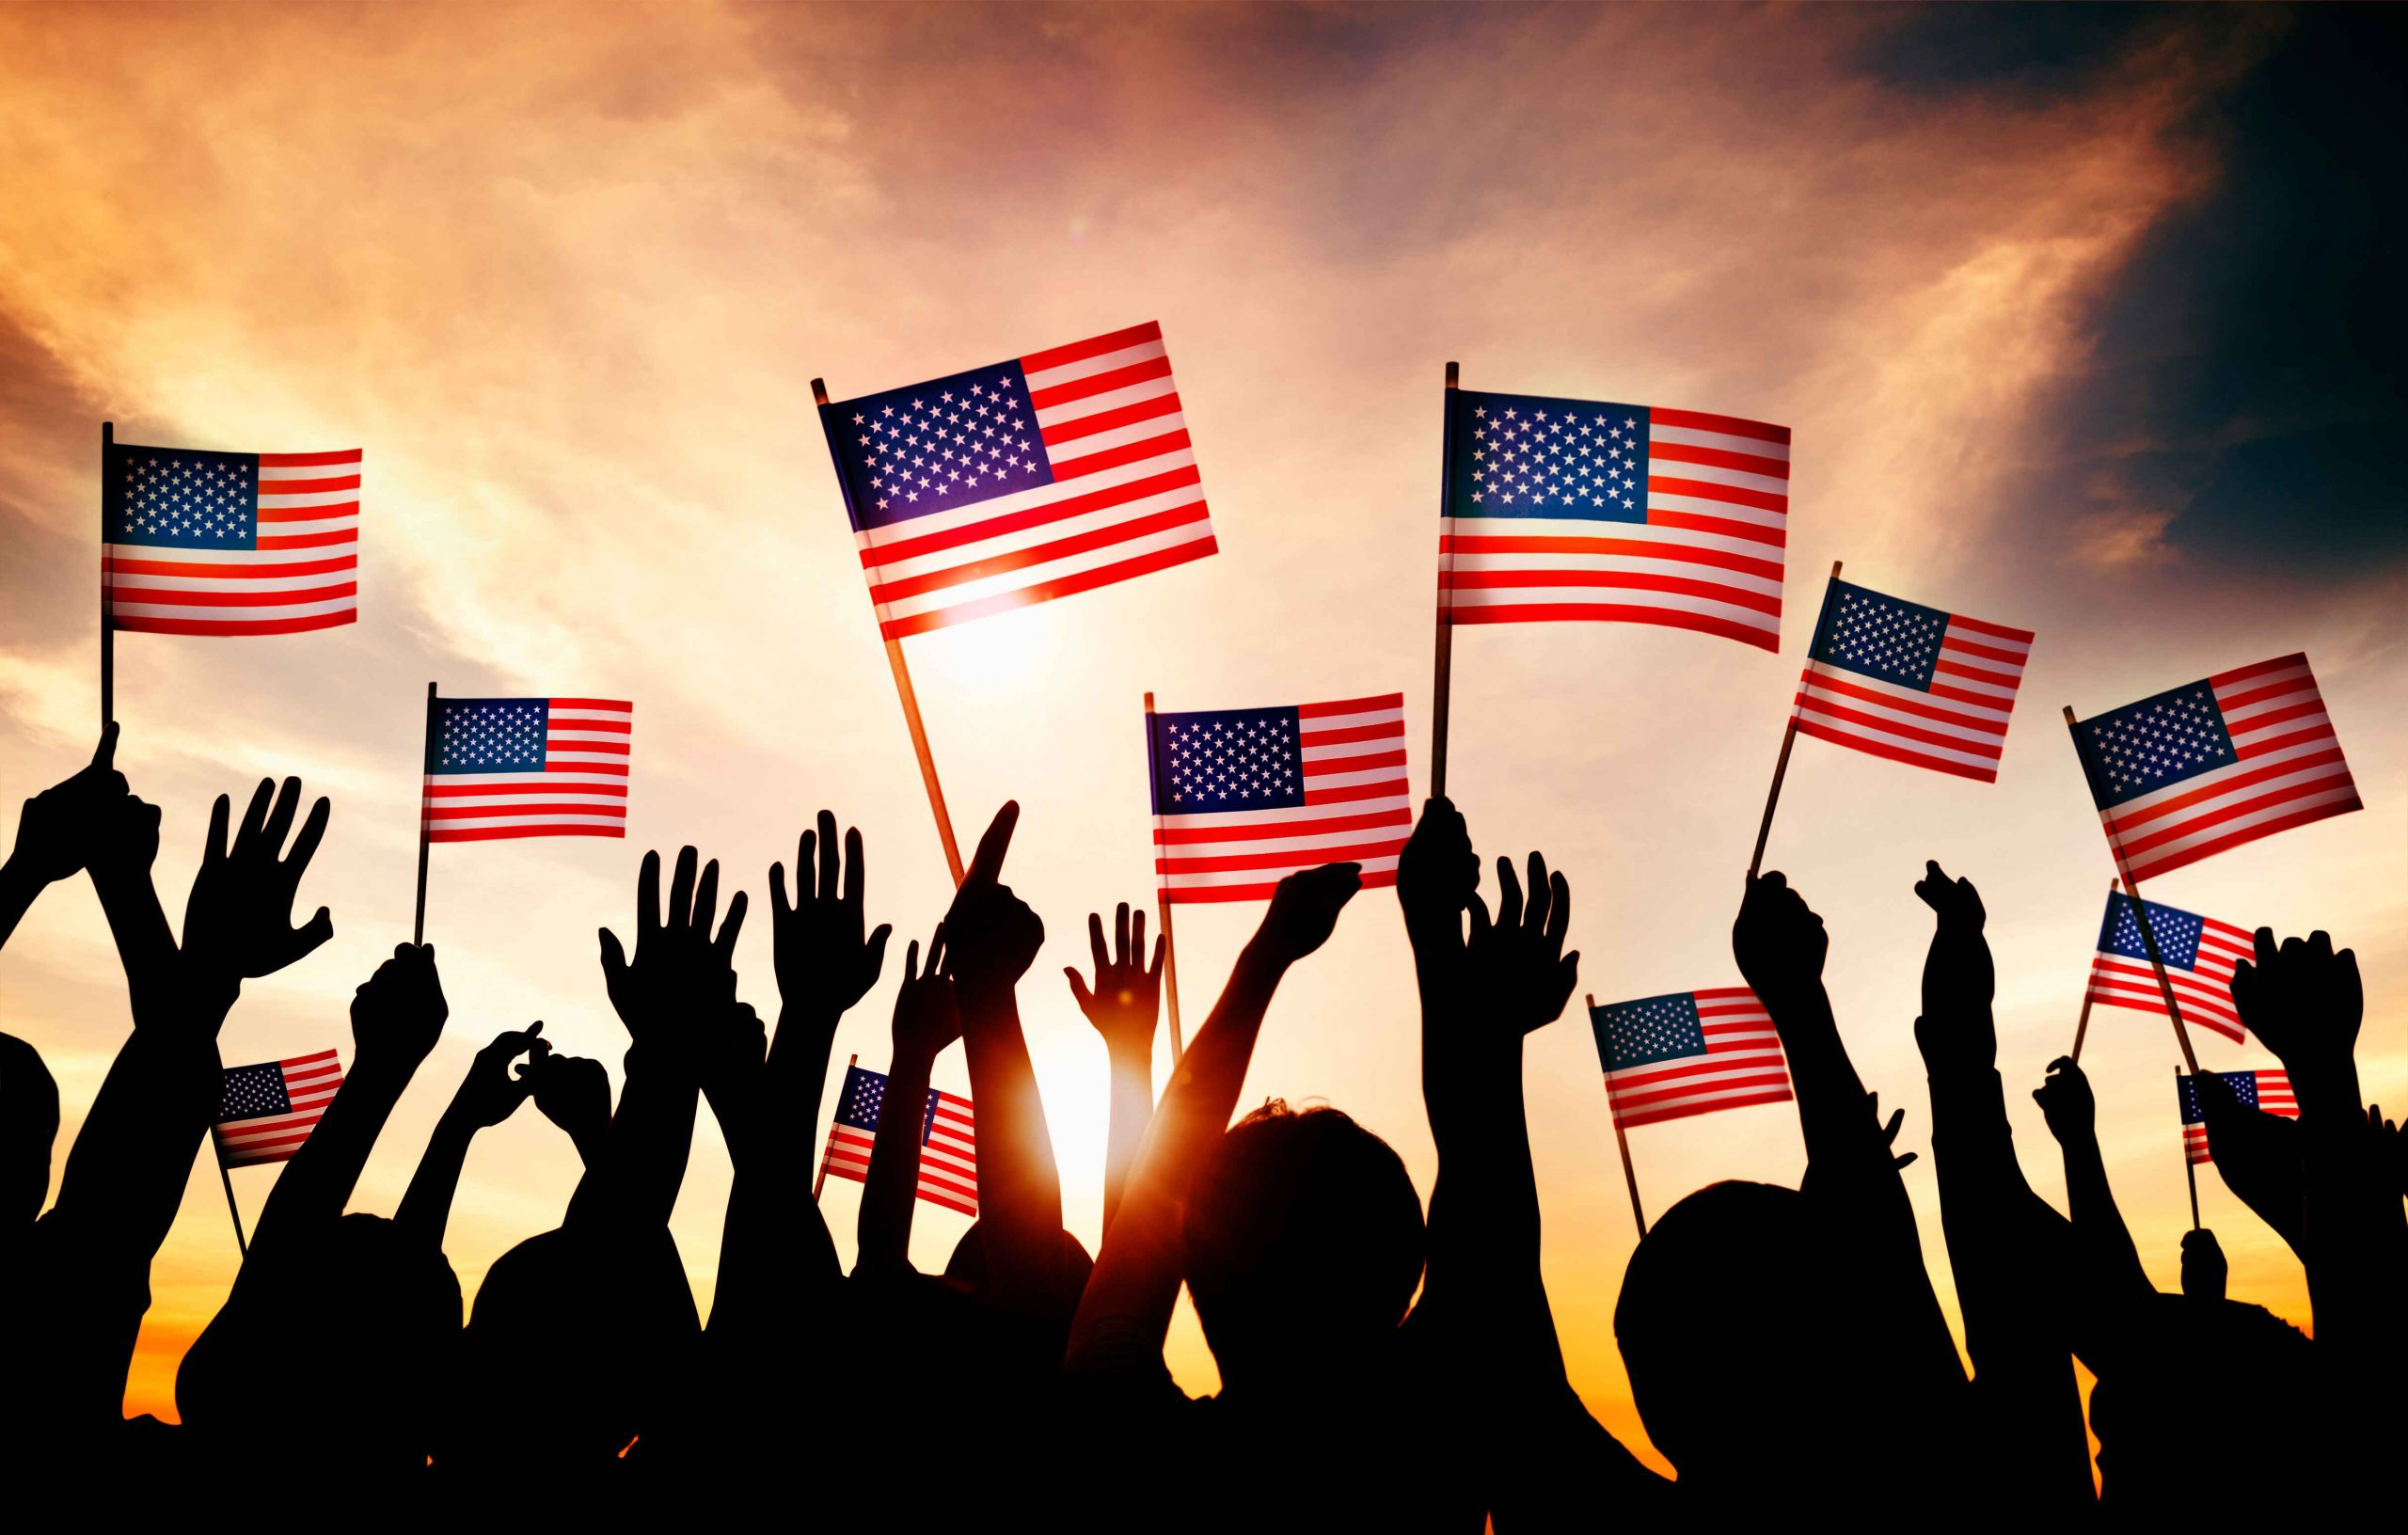 Backlit photo of group of people waving American flags in the air